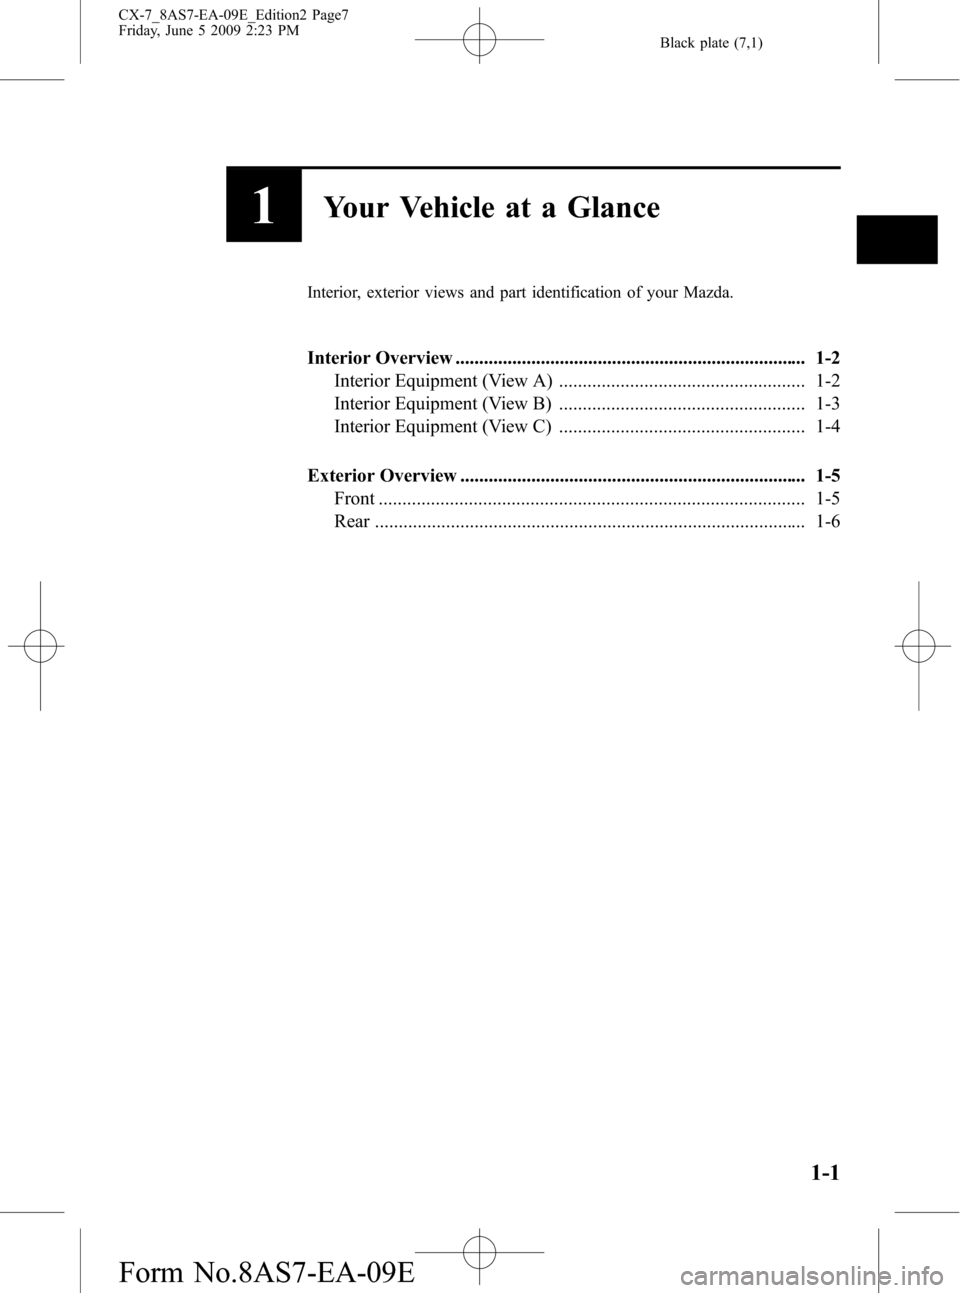 MAZDA MODEL CX-7 2010  Owners Manual (in English) Black plate (7,1)
1Your Vehicle at a Glance
Interior, exterior views and part identification of your Mazda.
Interior Overview ..........................................................................